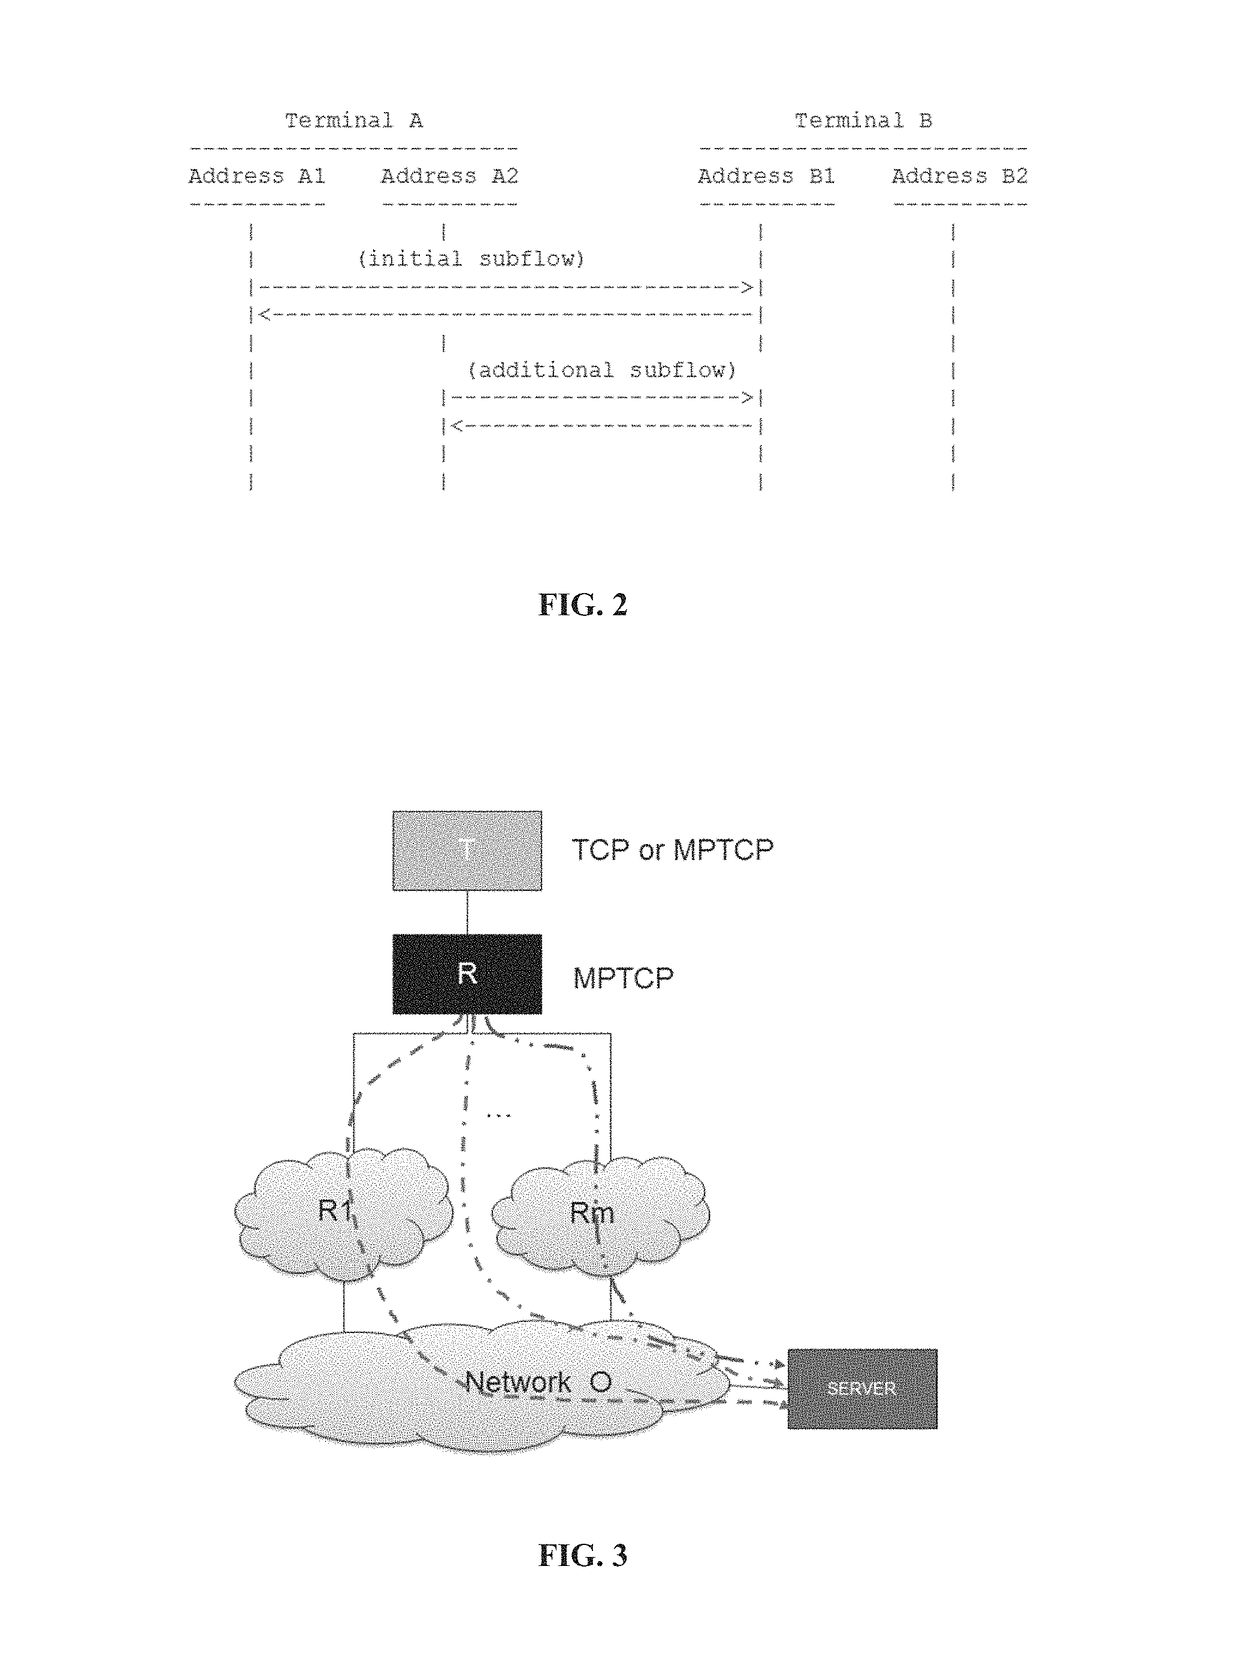 Method for selecting network connection concentrators